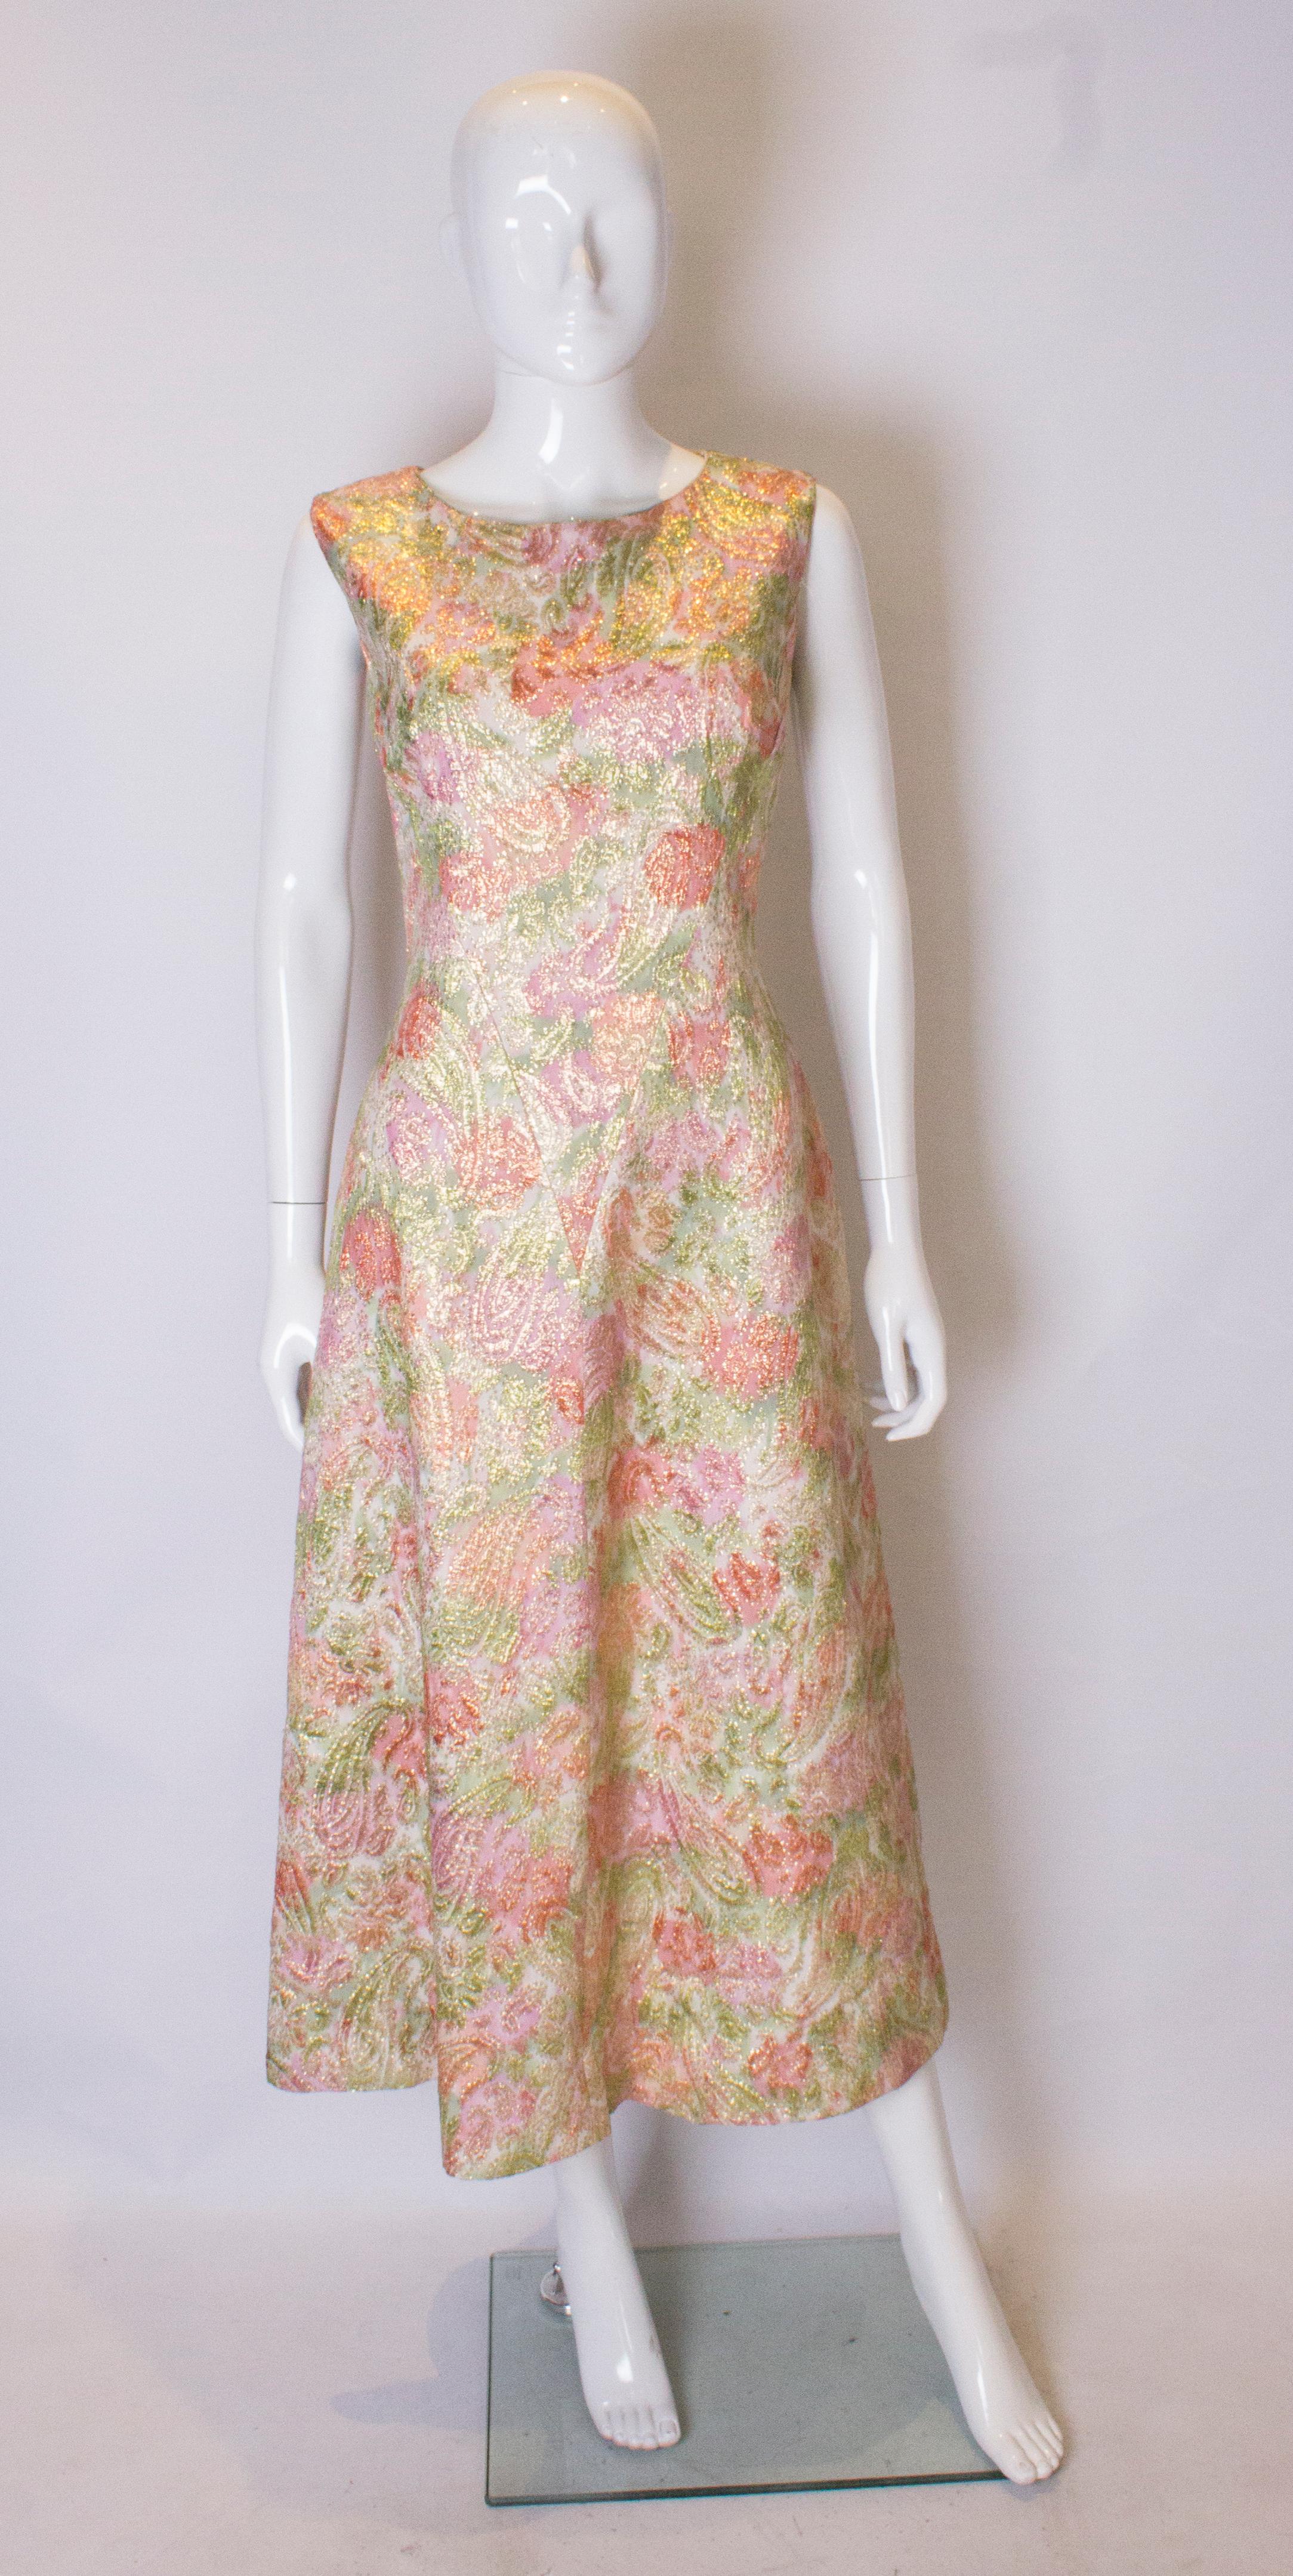 A pretty gown by Global Style in Paris. The gown is in a pretty pink and green colour, is sleeveless, and is fully lined with a central back zip.